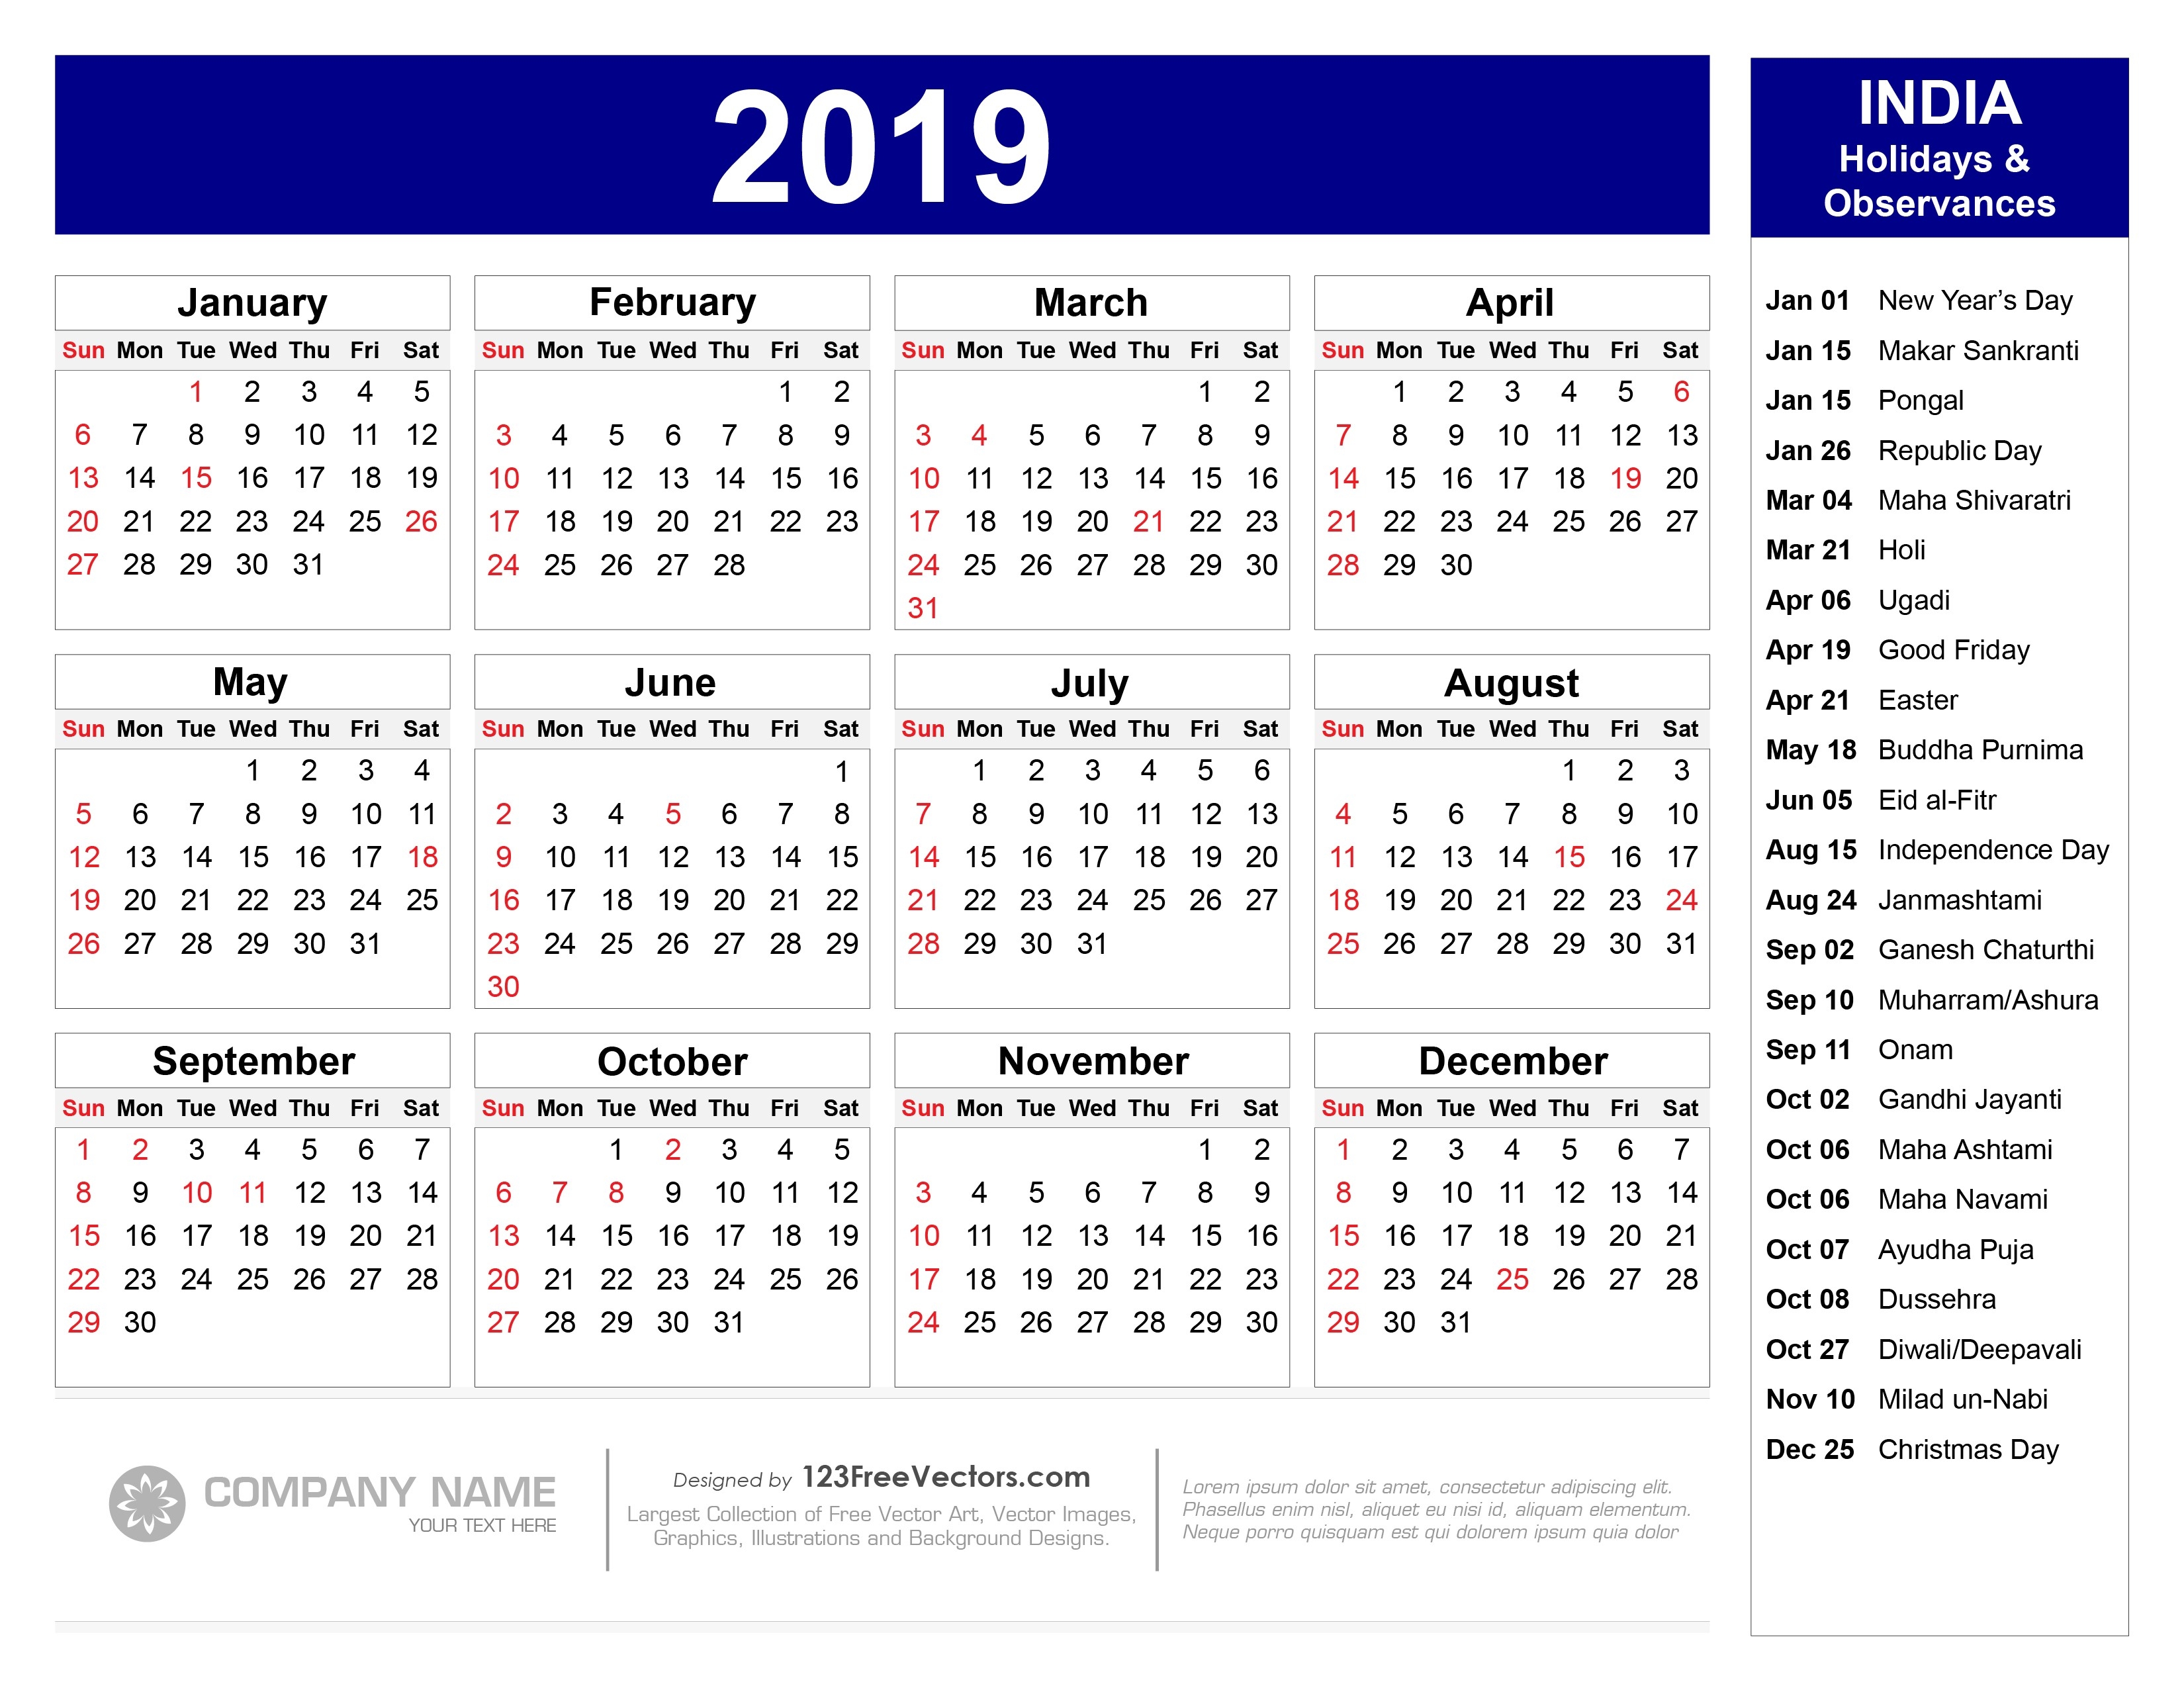 2019 Calendar With Indian Holidays Pdf-July 2020 Calendar With Holidays India